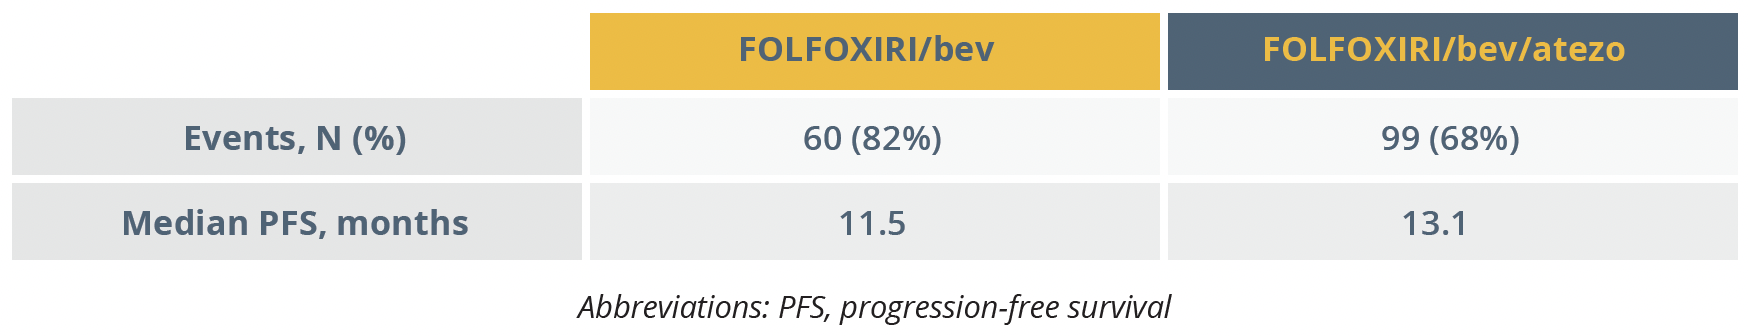 Significant improvement in PFS with add-on atezolizumab in patients receiving FOLFOXIRI plus bevacizumab 